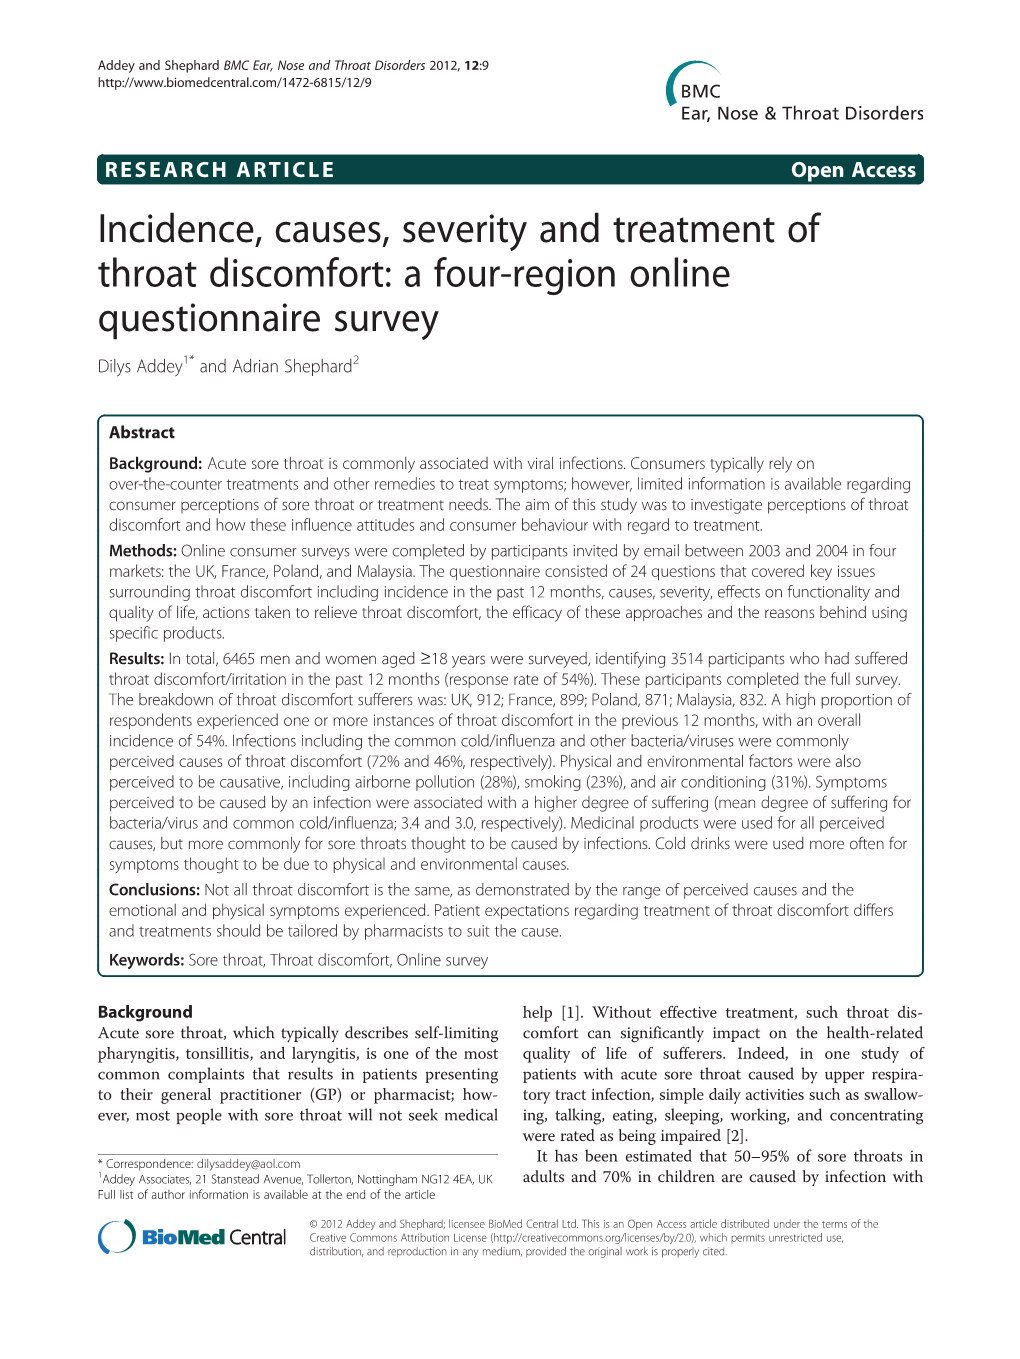 Incidence, Causes, Severity and Treatment of Throat Discomfort: a Four-Region Online Questionnaire Survey Dilys Addey1* and Adrian Shephard2